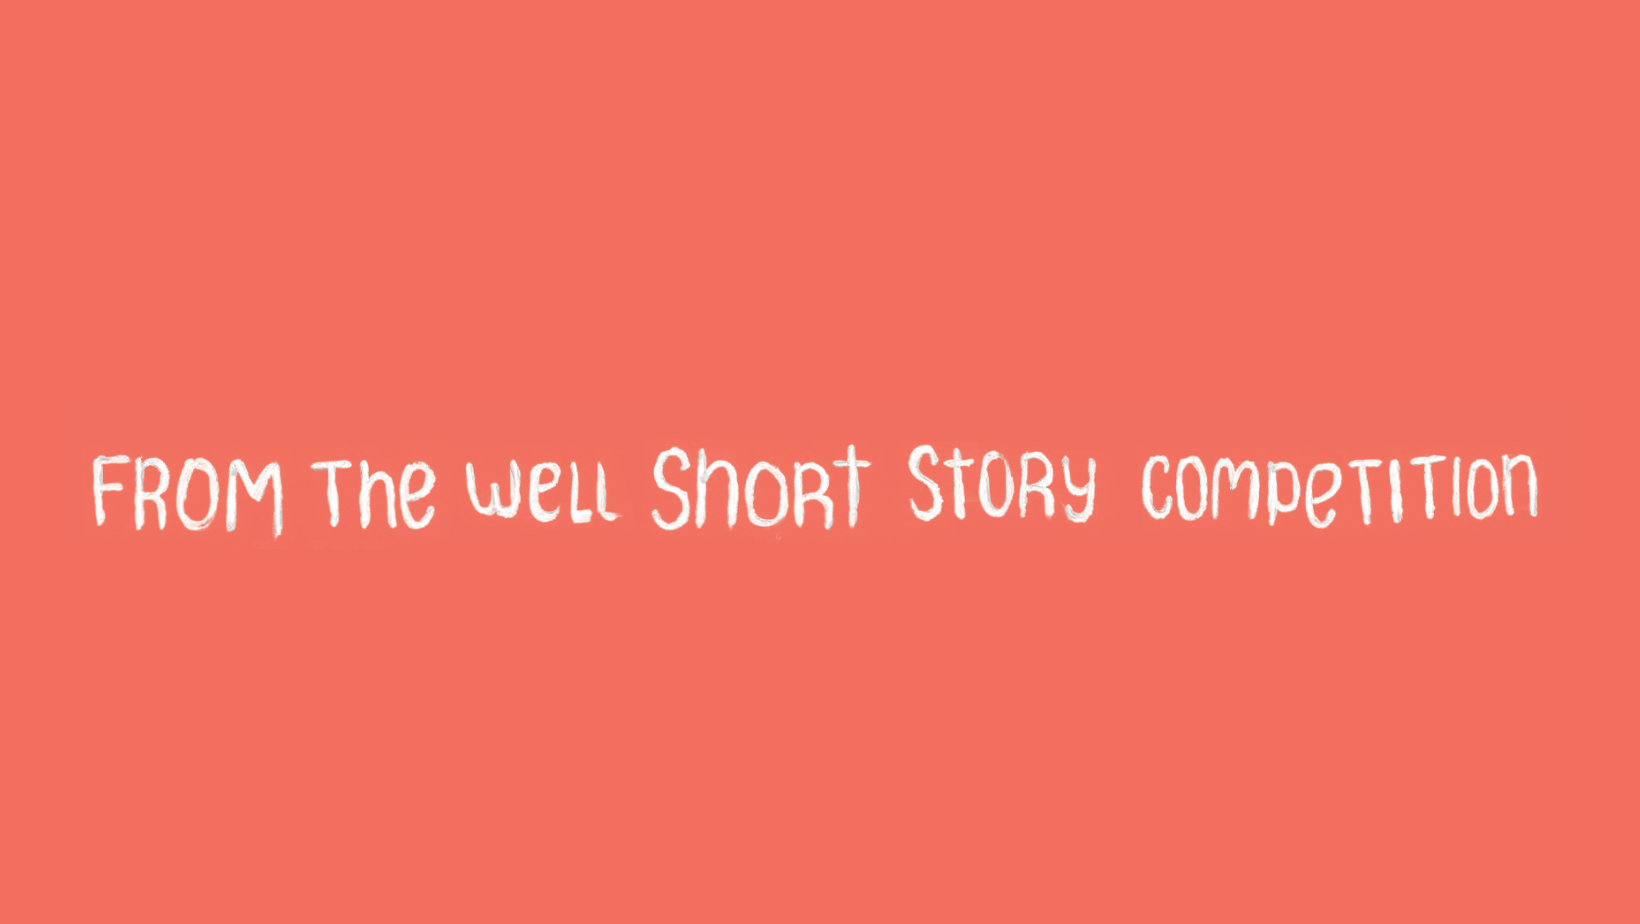 From The Well Short Story Competition graphic.